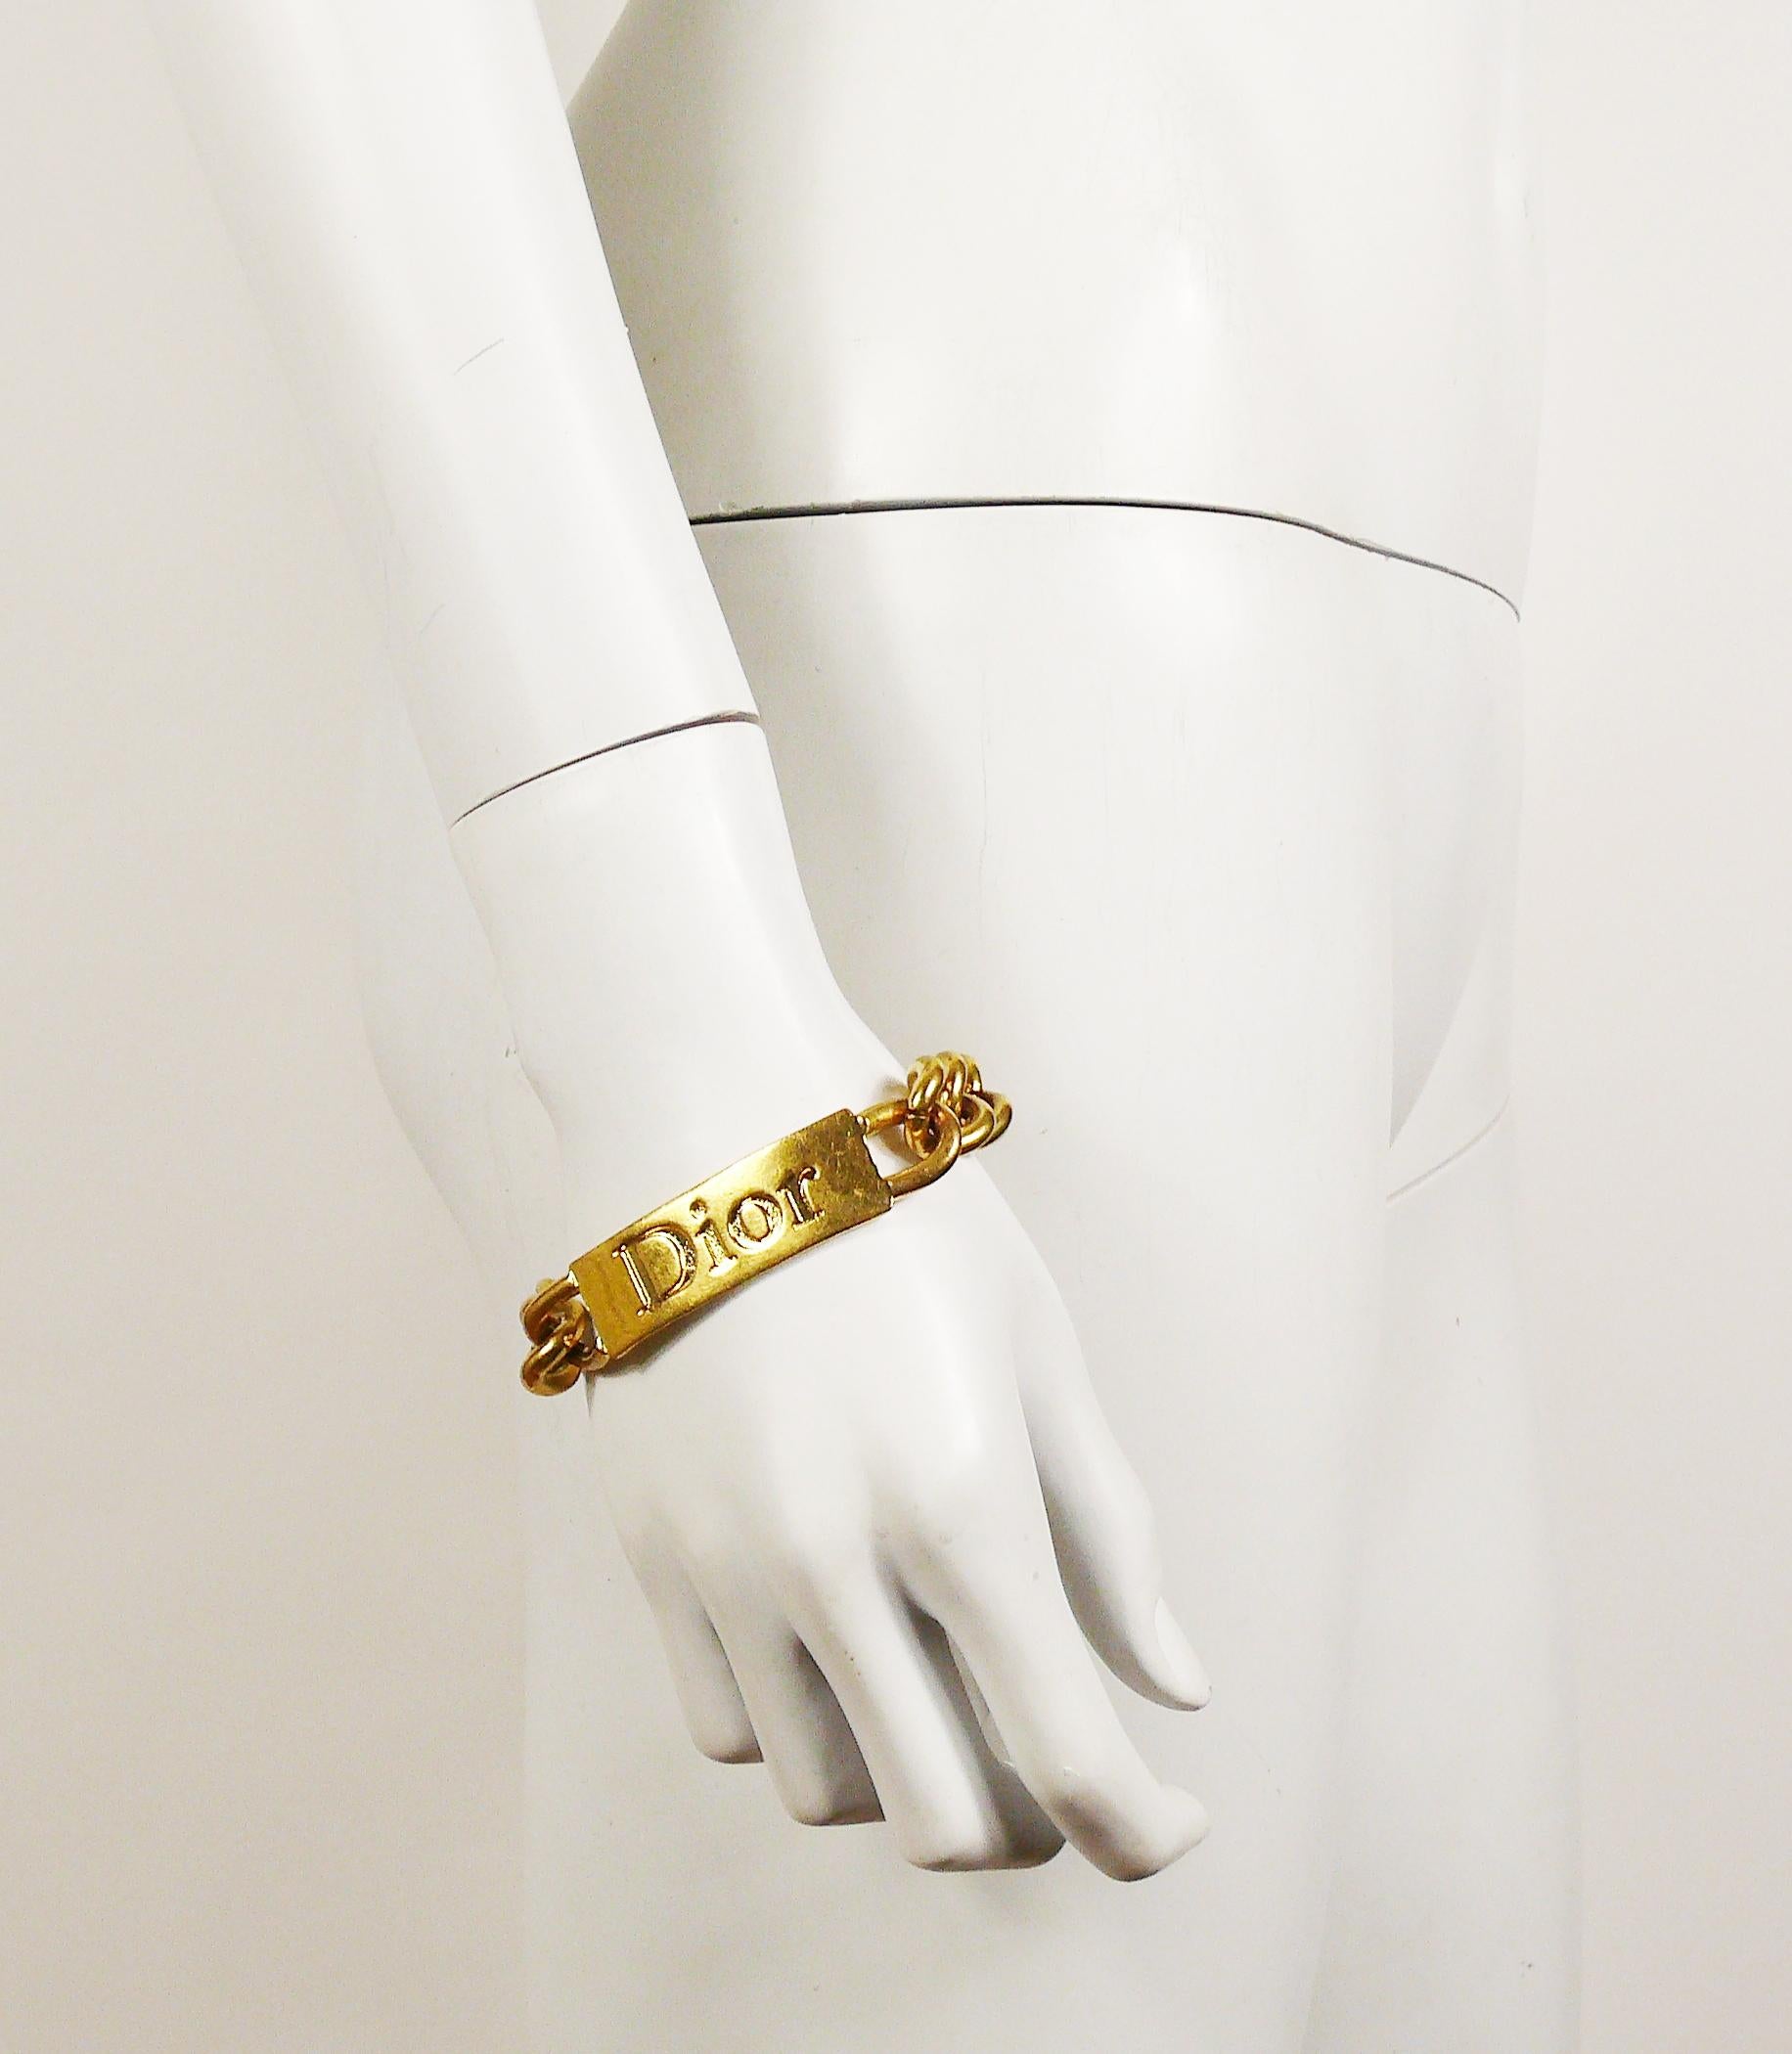 CHRISTIAN DIOR chunky gold toned bracelet featuring curb links and ID tag embossed DIOR.

Early 2000s JOHN GALLIANO era.

Embossed DIOR ©.

Indicative measurements : length approx. 20 cm (7.87 inches)  / link width 1.5 cm (0.59 inch).

JEWELRY